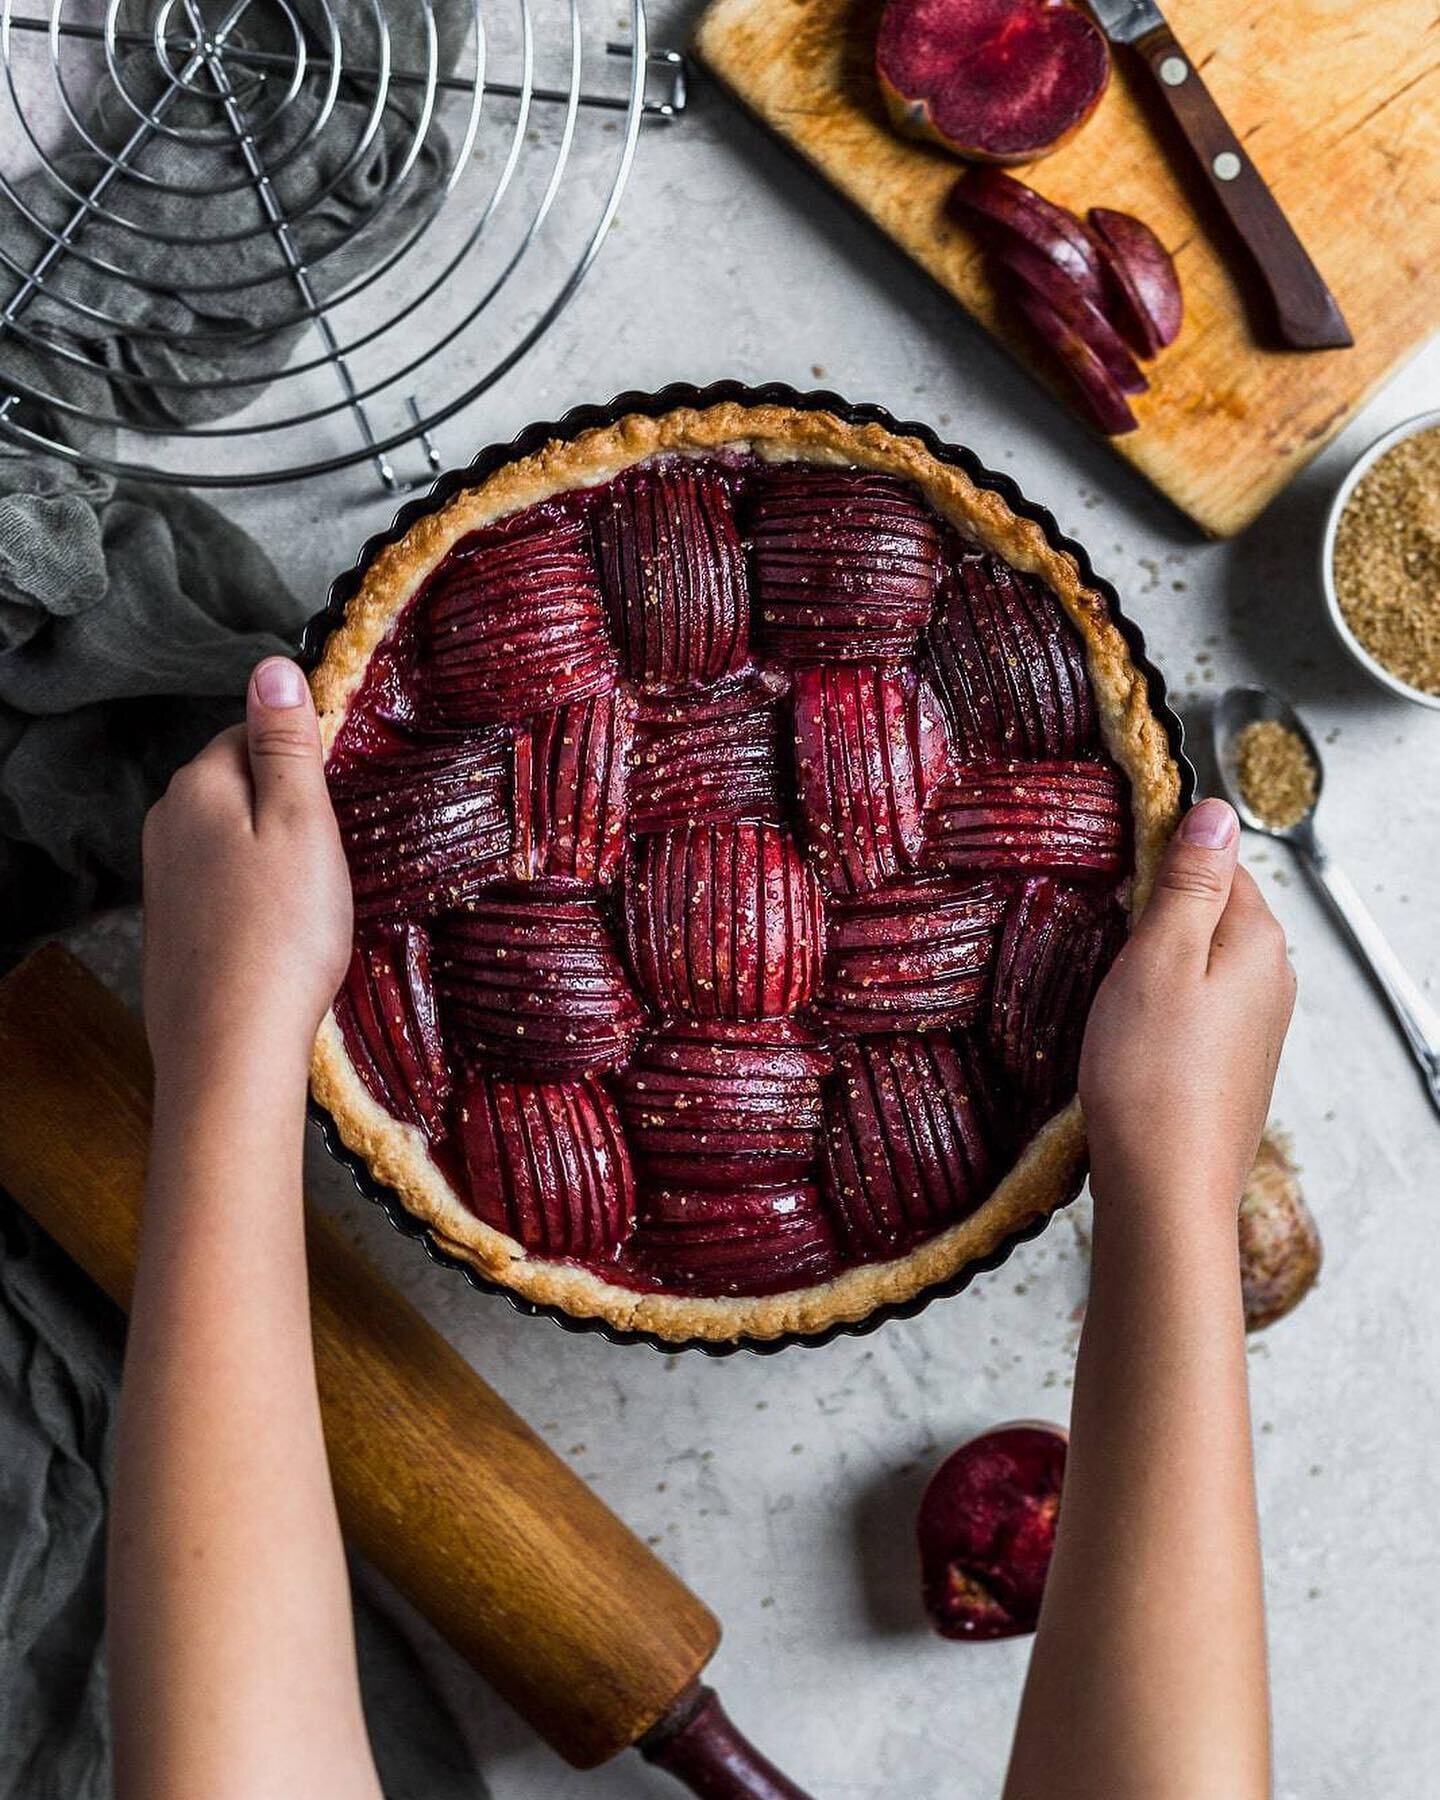 Want a beautiful summer dessert that only includes 4 ingredients and looks insanely delicious? Of course you do! Then this plum tart is for you!
It is:
&bull;easy to make
&bull;has a short bake time
&bull;looks crazy pretty
&bull;tastes amazing 

Thi